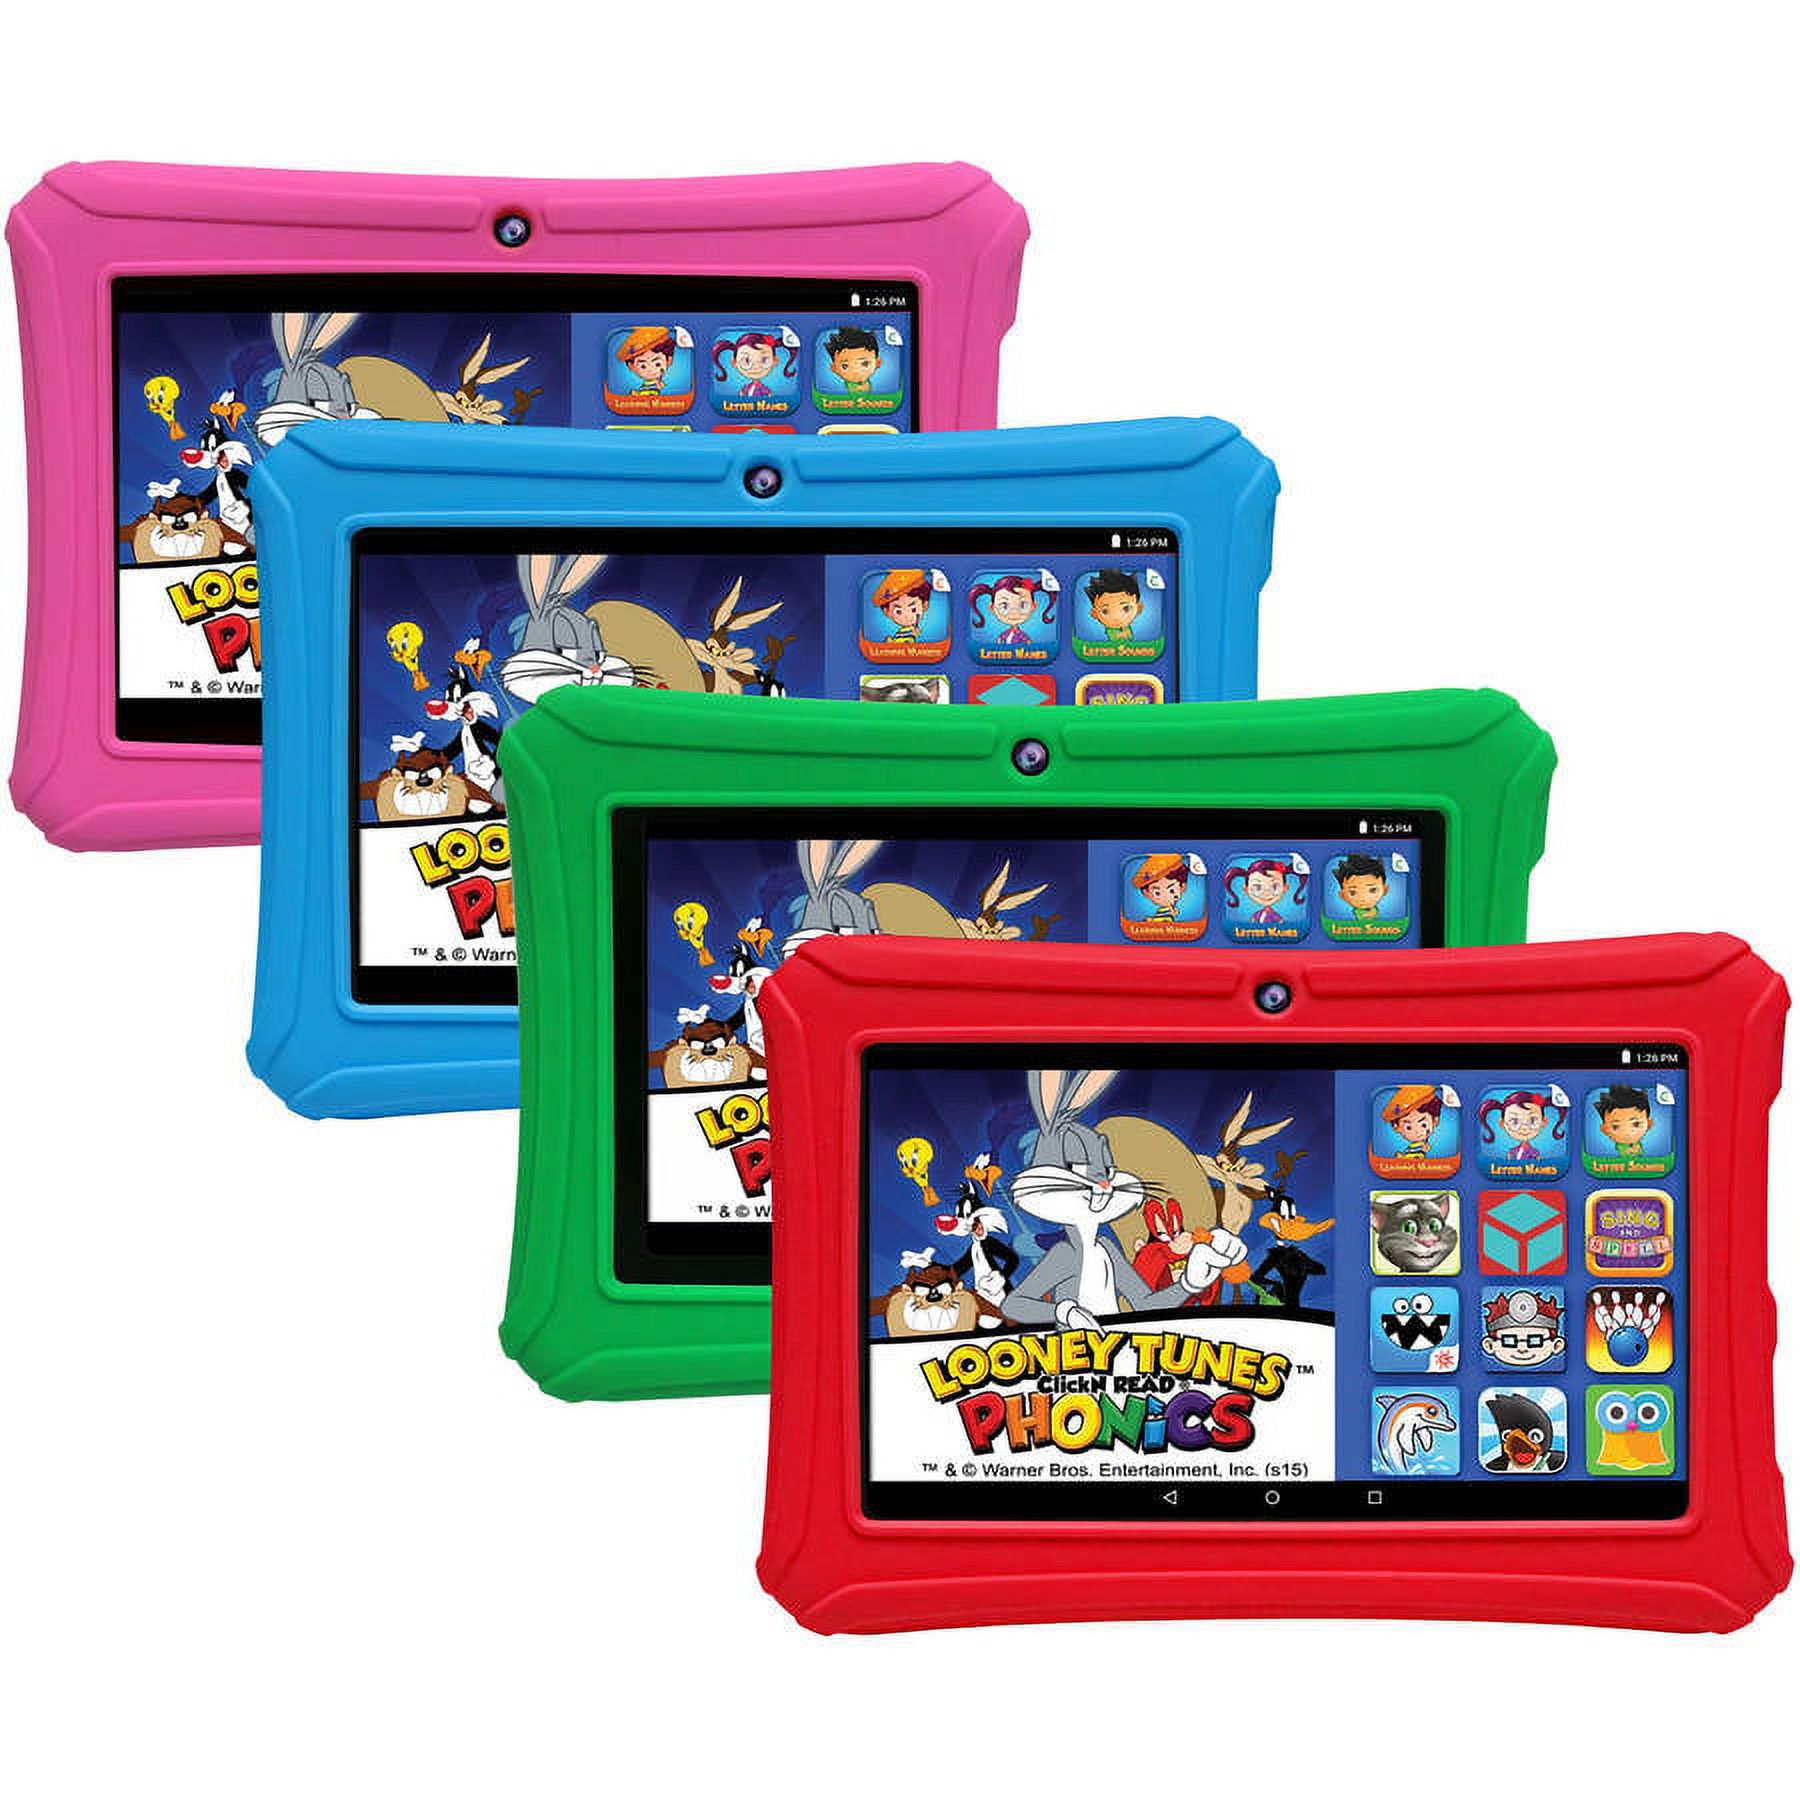 HighQ Learning Tab 7" Kids Tablet 16GB Intel Atom Processor Preloaded with Learning Apps & Games Pink - image 1 of 5